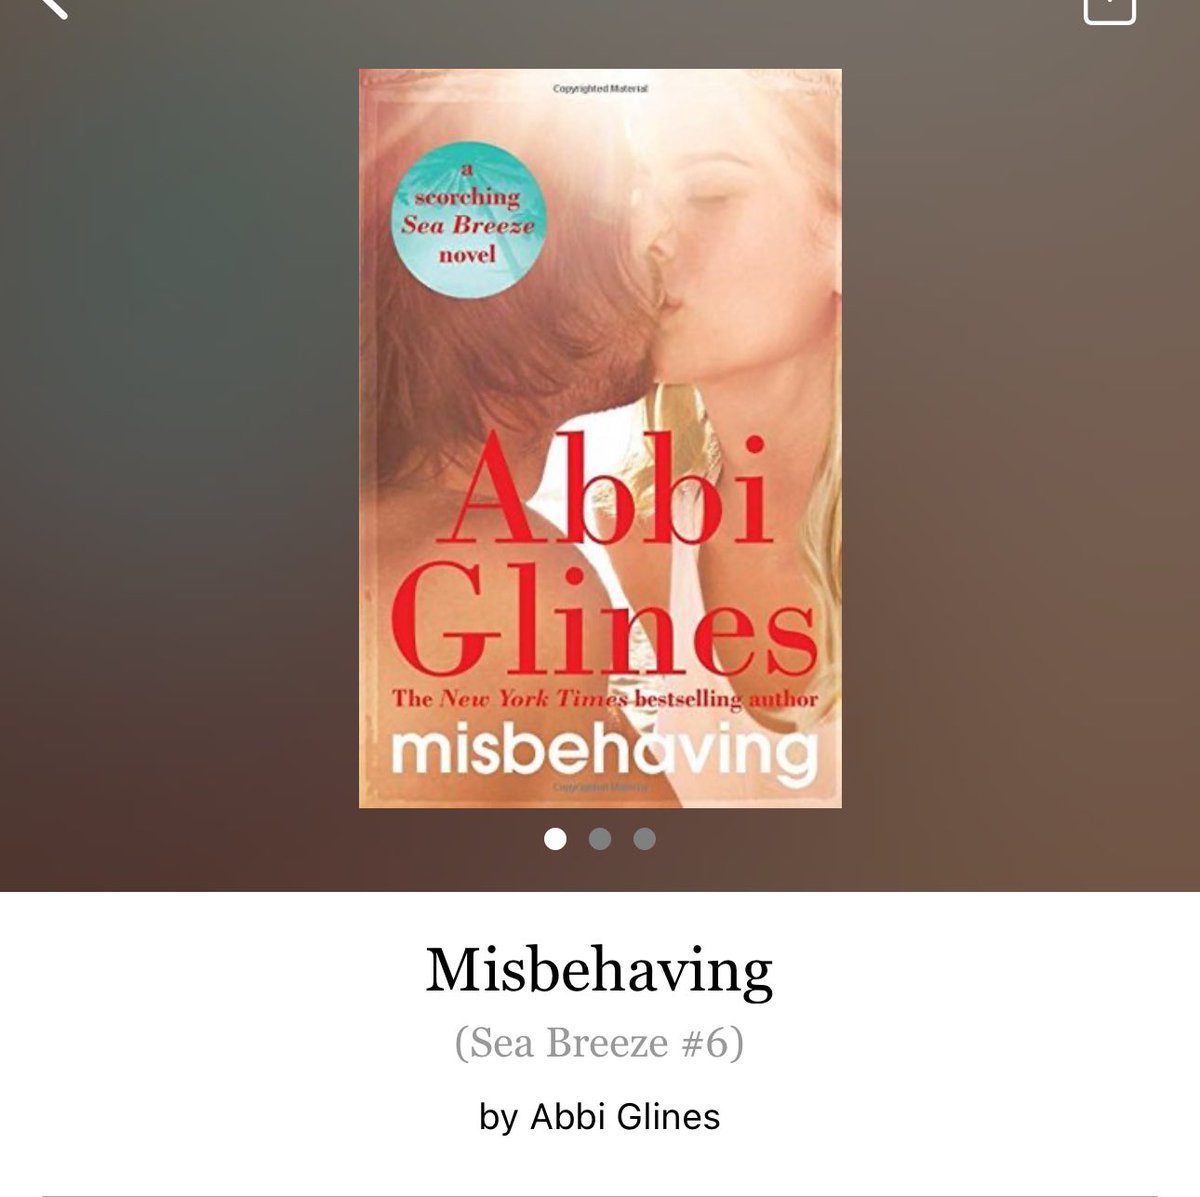 Misbehaving by Abbi Glines 

#Misbehaving by #AbbiGlines #6300 #208apges #449of400 #Series #Audiobook #87for22 #Book6of9 #SeaBreezeSeries #7houraudiobook #Audiobook #JasonAndJess #april2024 #clearingoffreadingshelves #whatsnext #readitquick